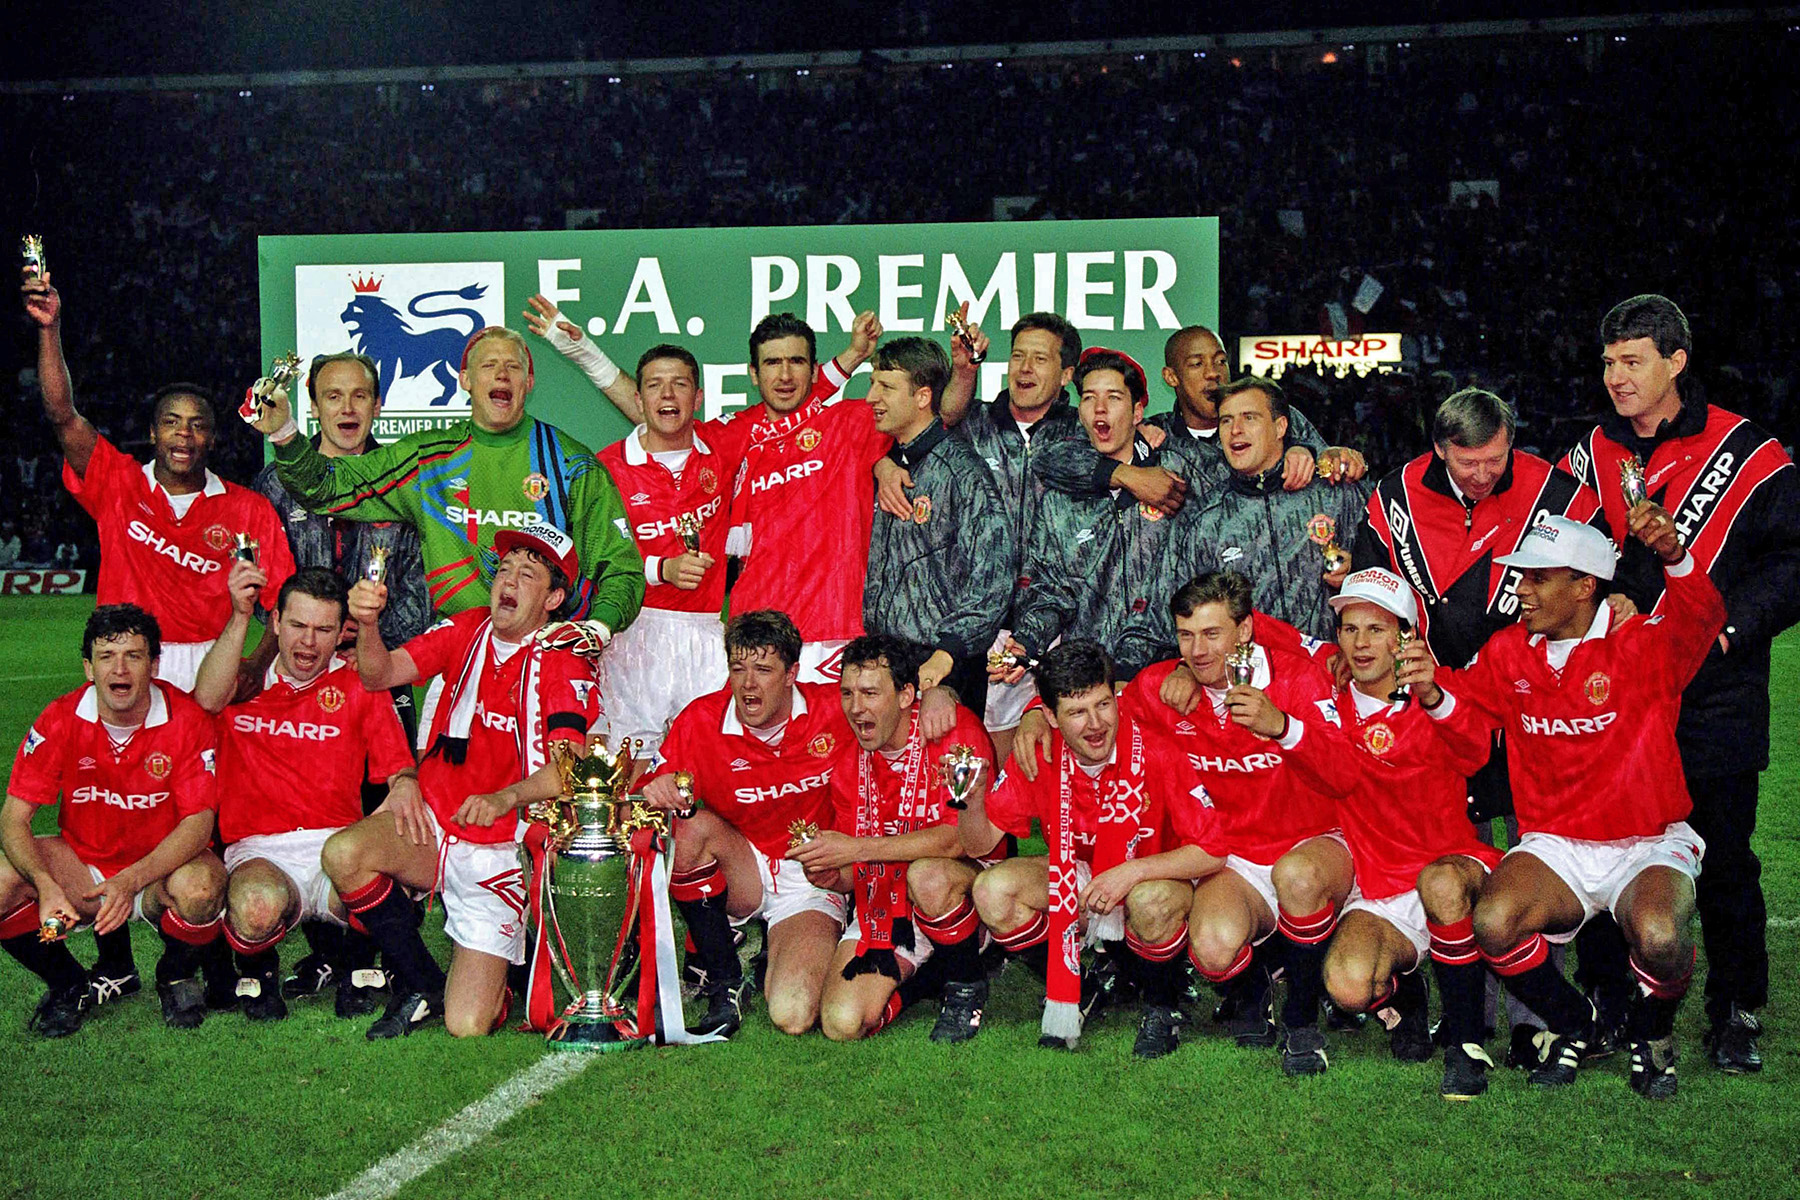 Manchester United - Winner of the Premier League 1992-1993 (First Season)